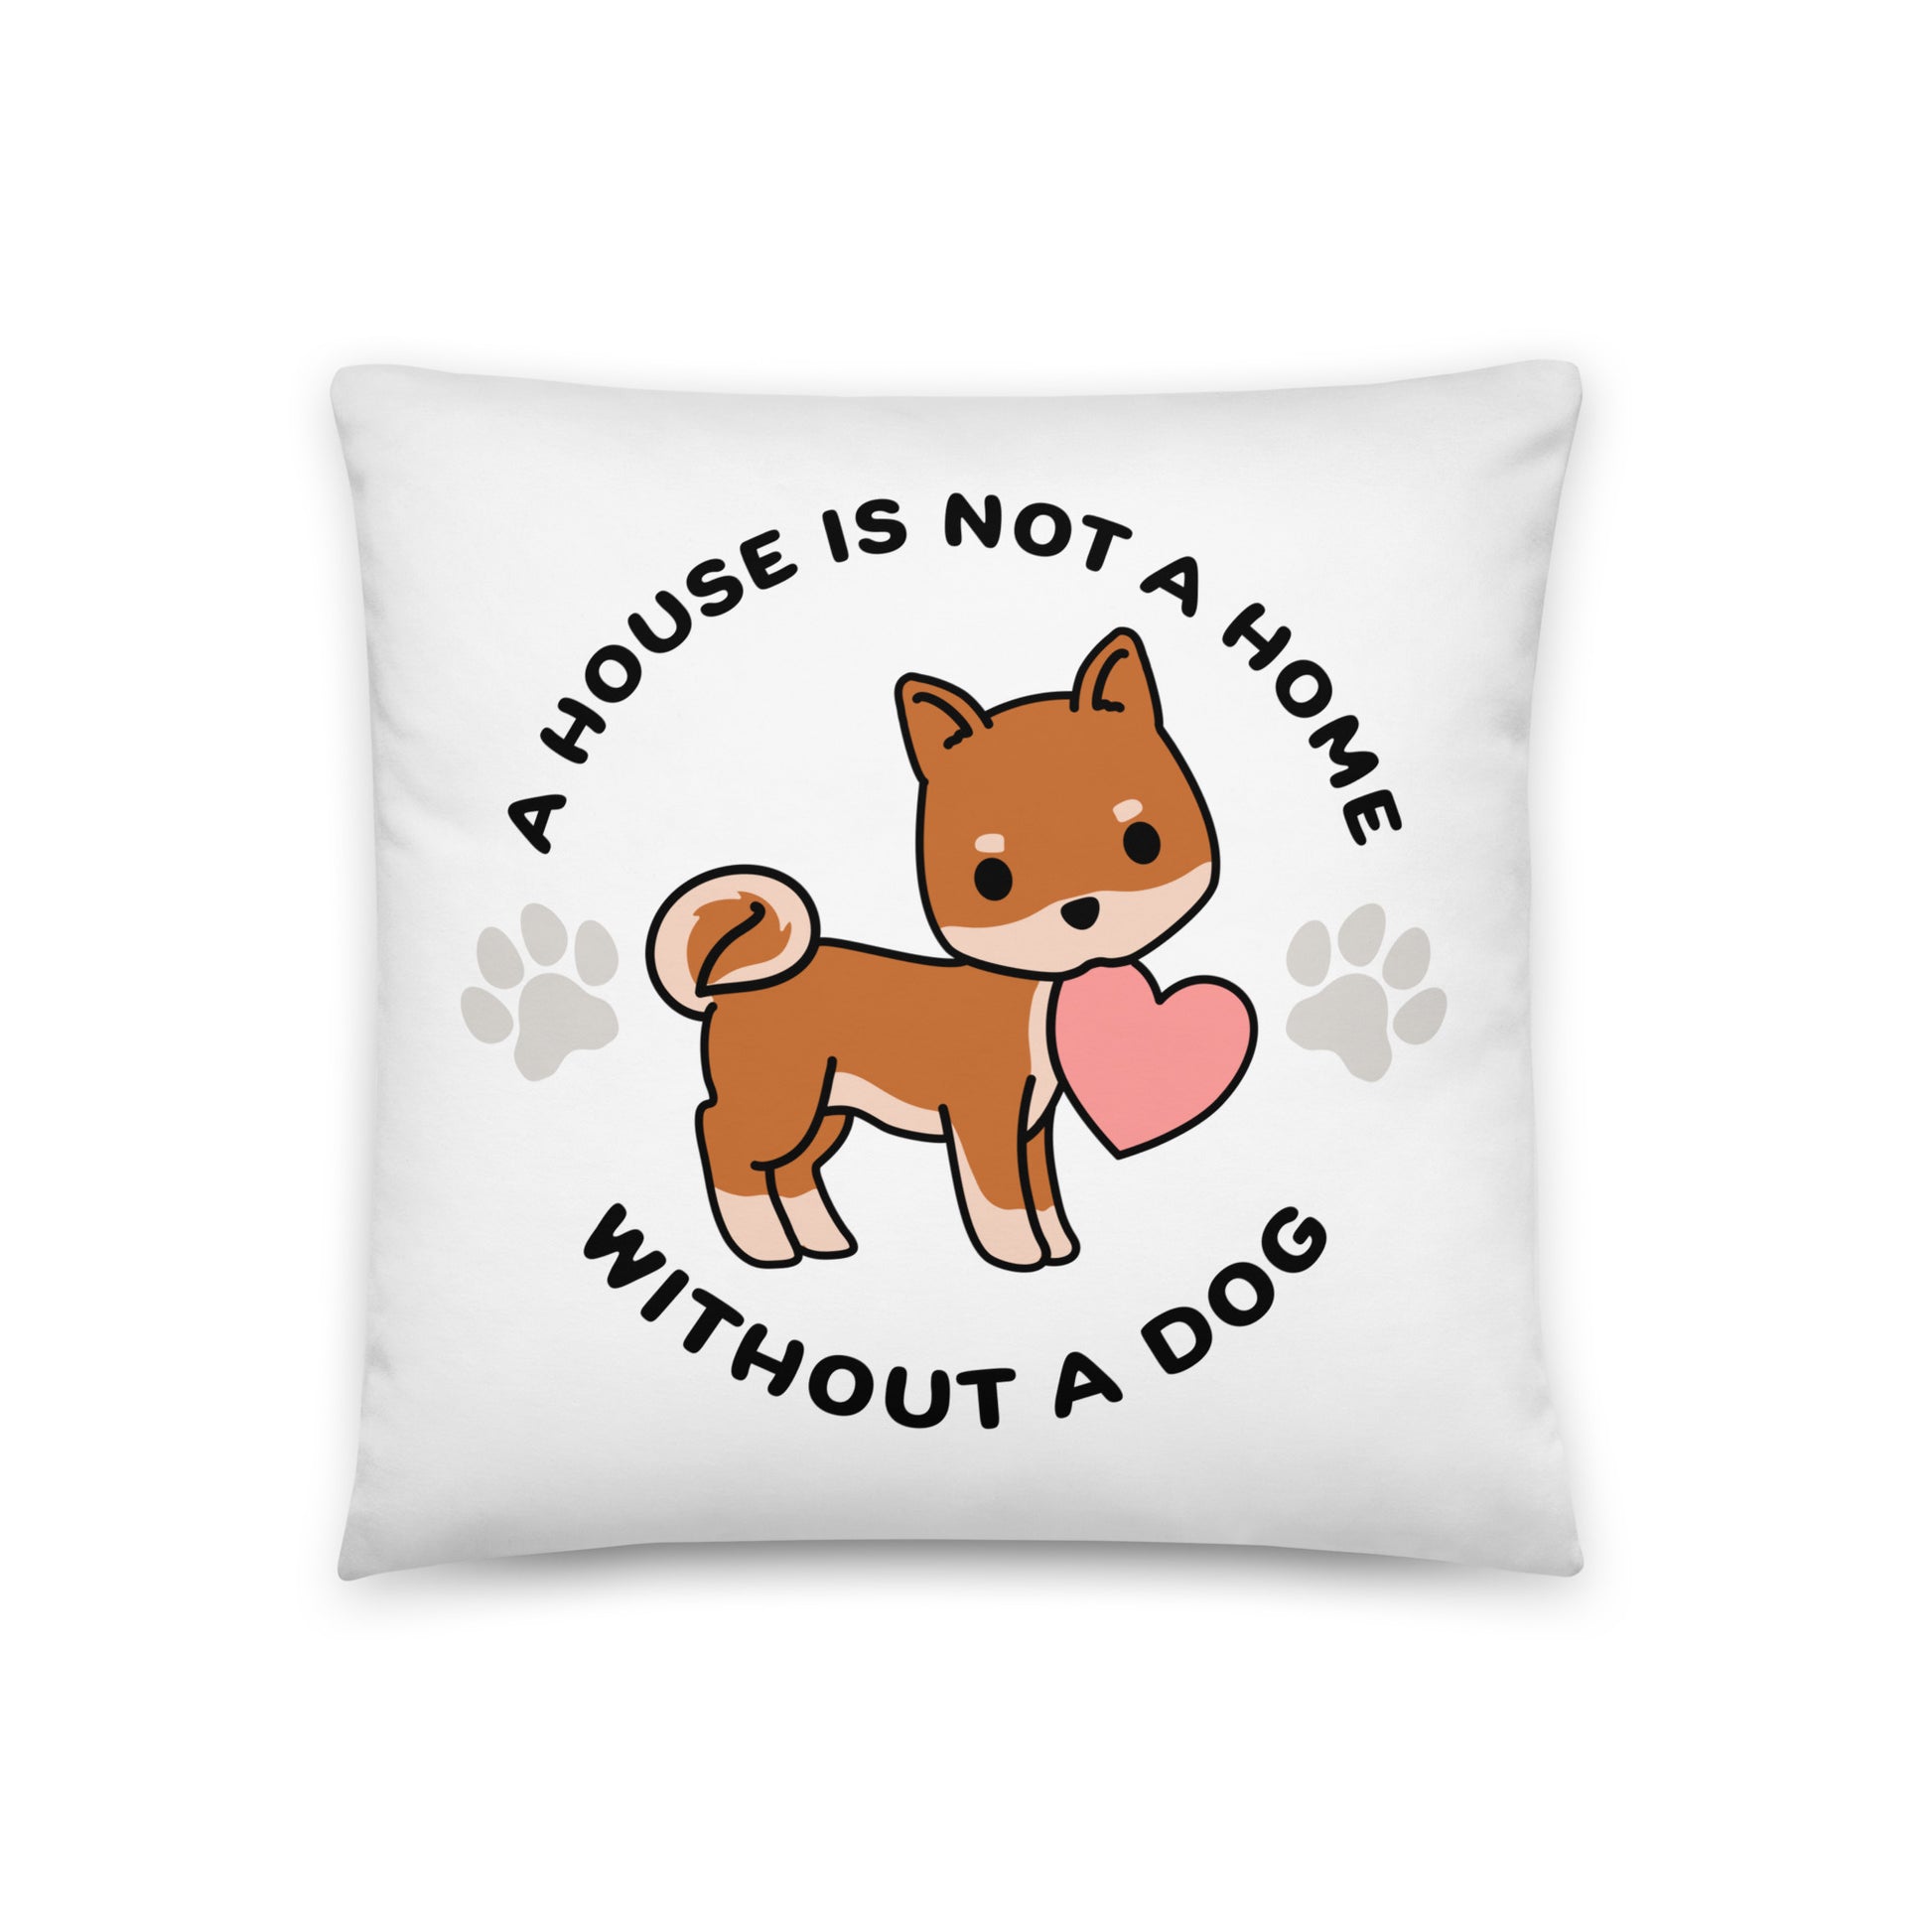 A white, 18" x 18" pillow featuing a cute, stylized illustration of a Shiba Inu holding a heart in its mouth. Text in a circle around the dog reads "A house is not a home without a dog"